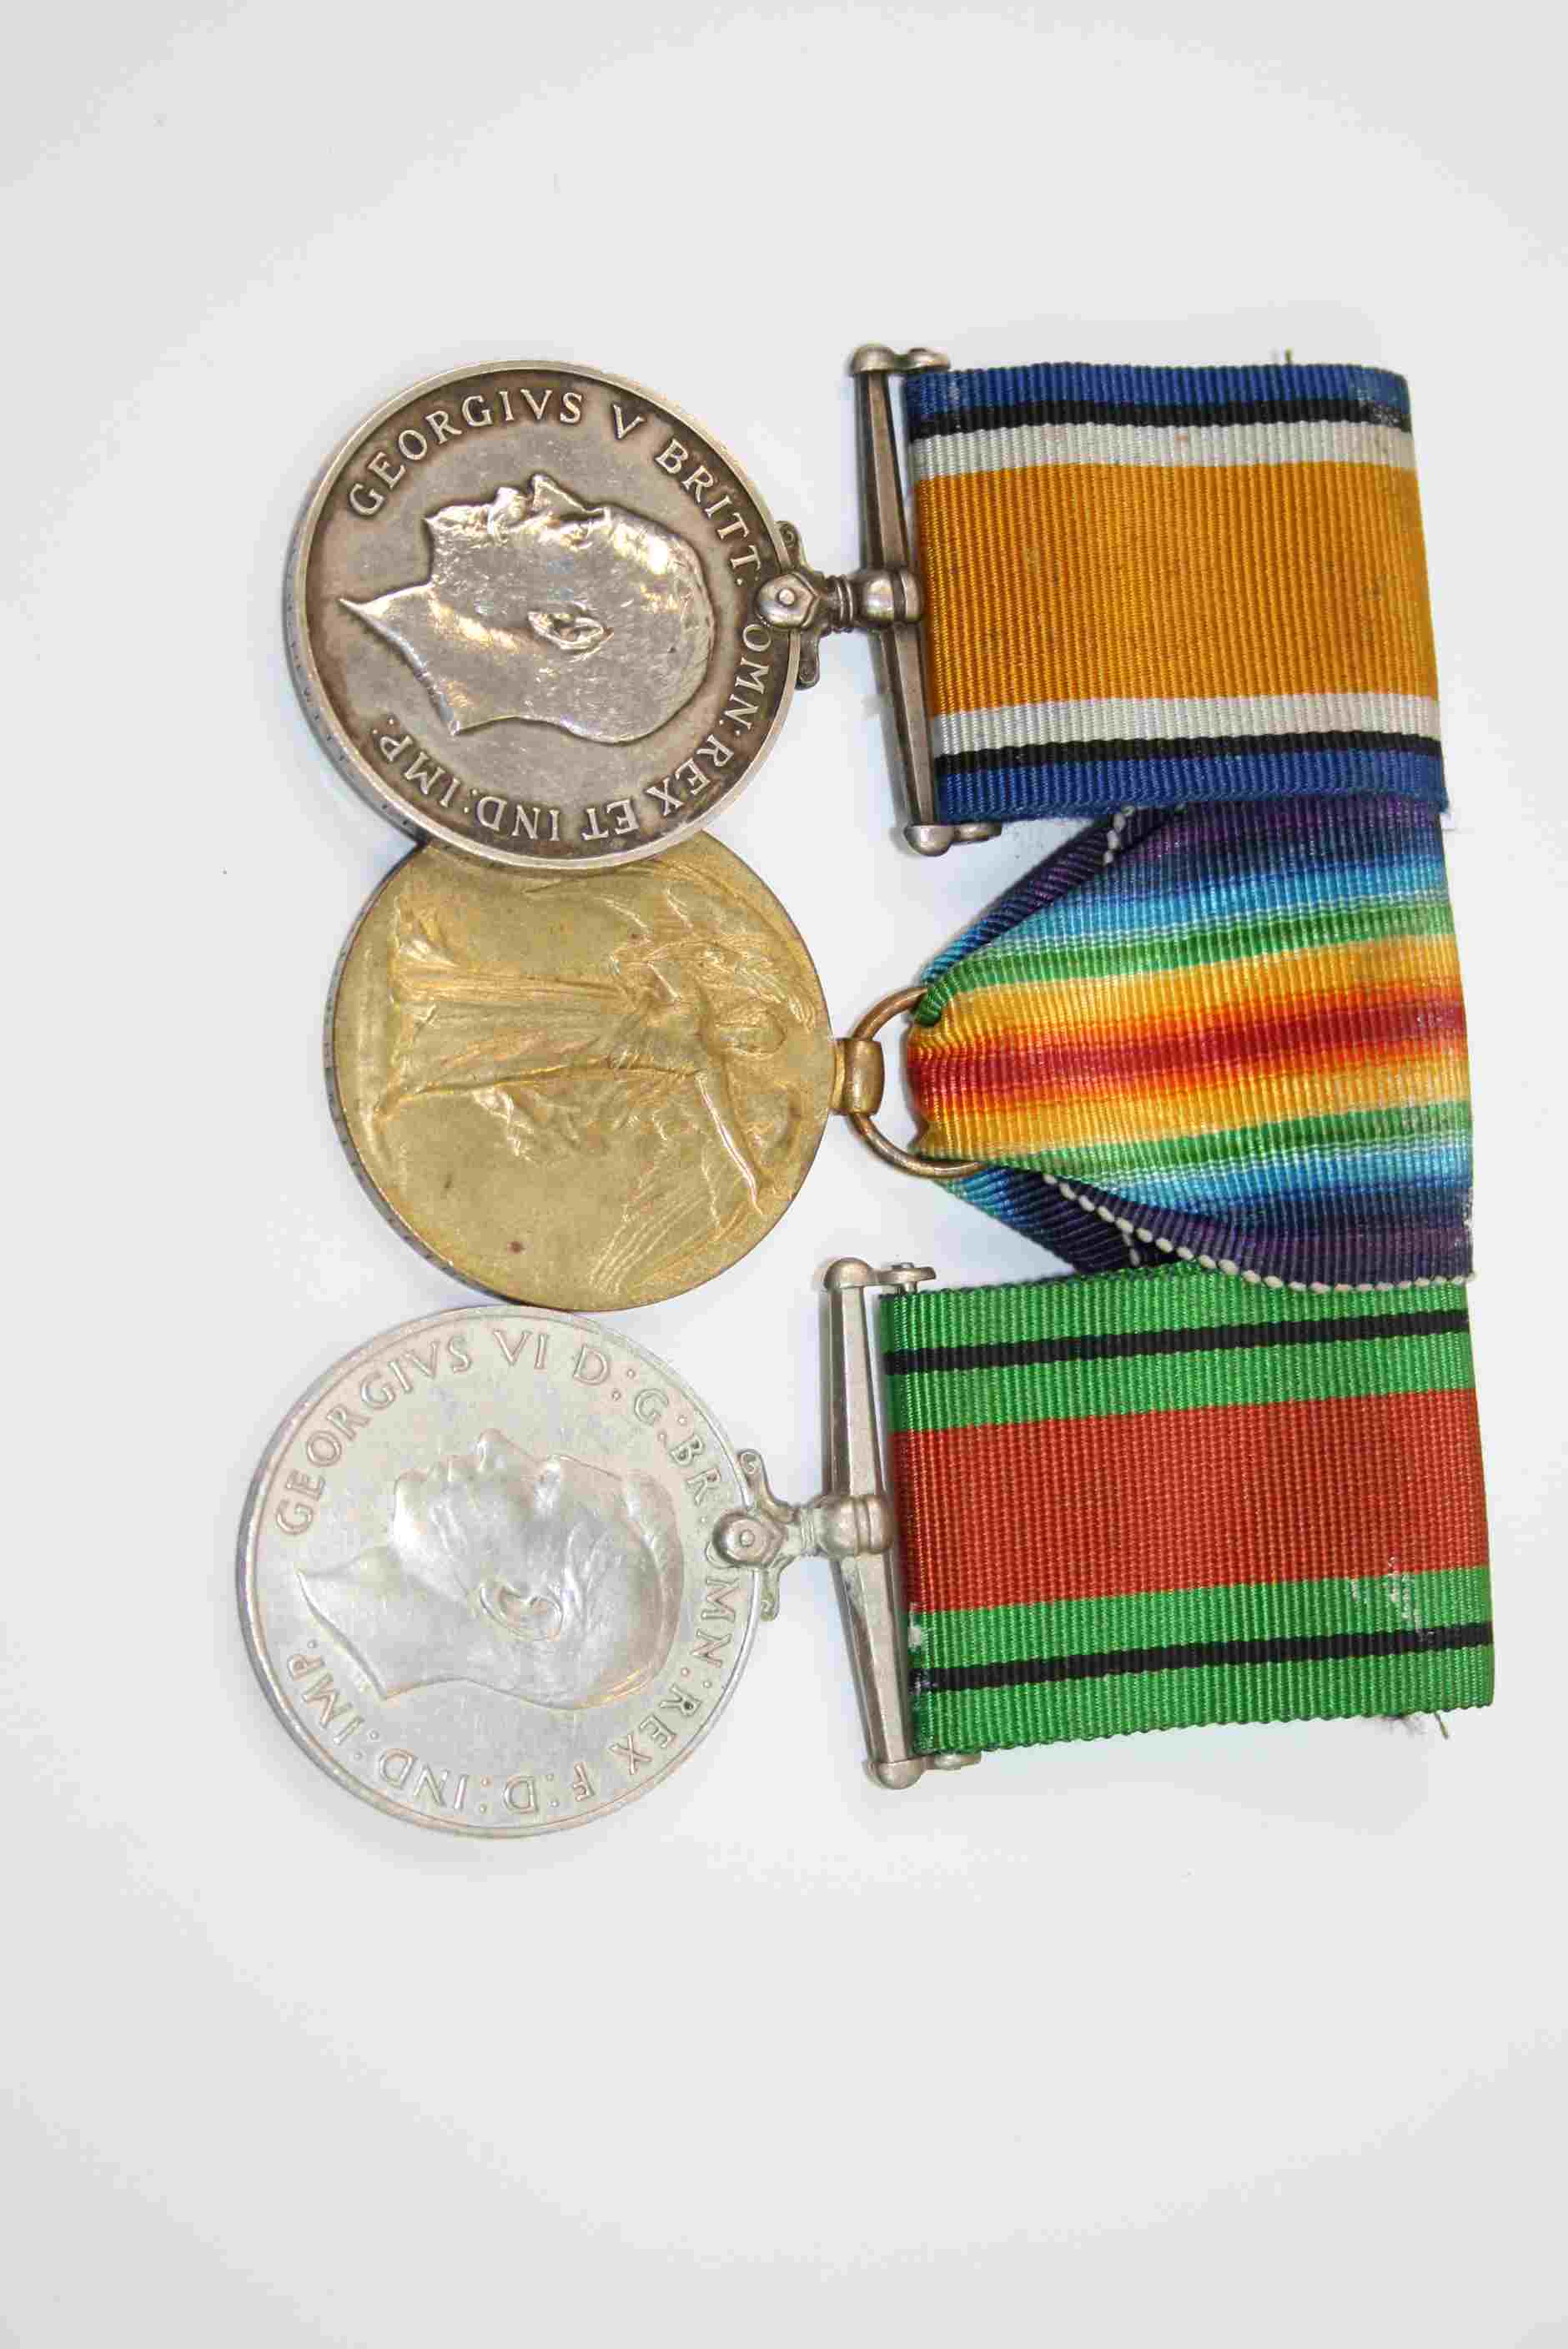 A Full Size British World War One Medal Pair Issued To 42517 PTE. L.J. HEWITT Of The - Image 2 of 5